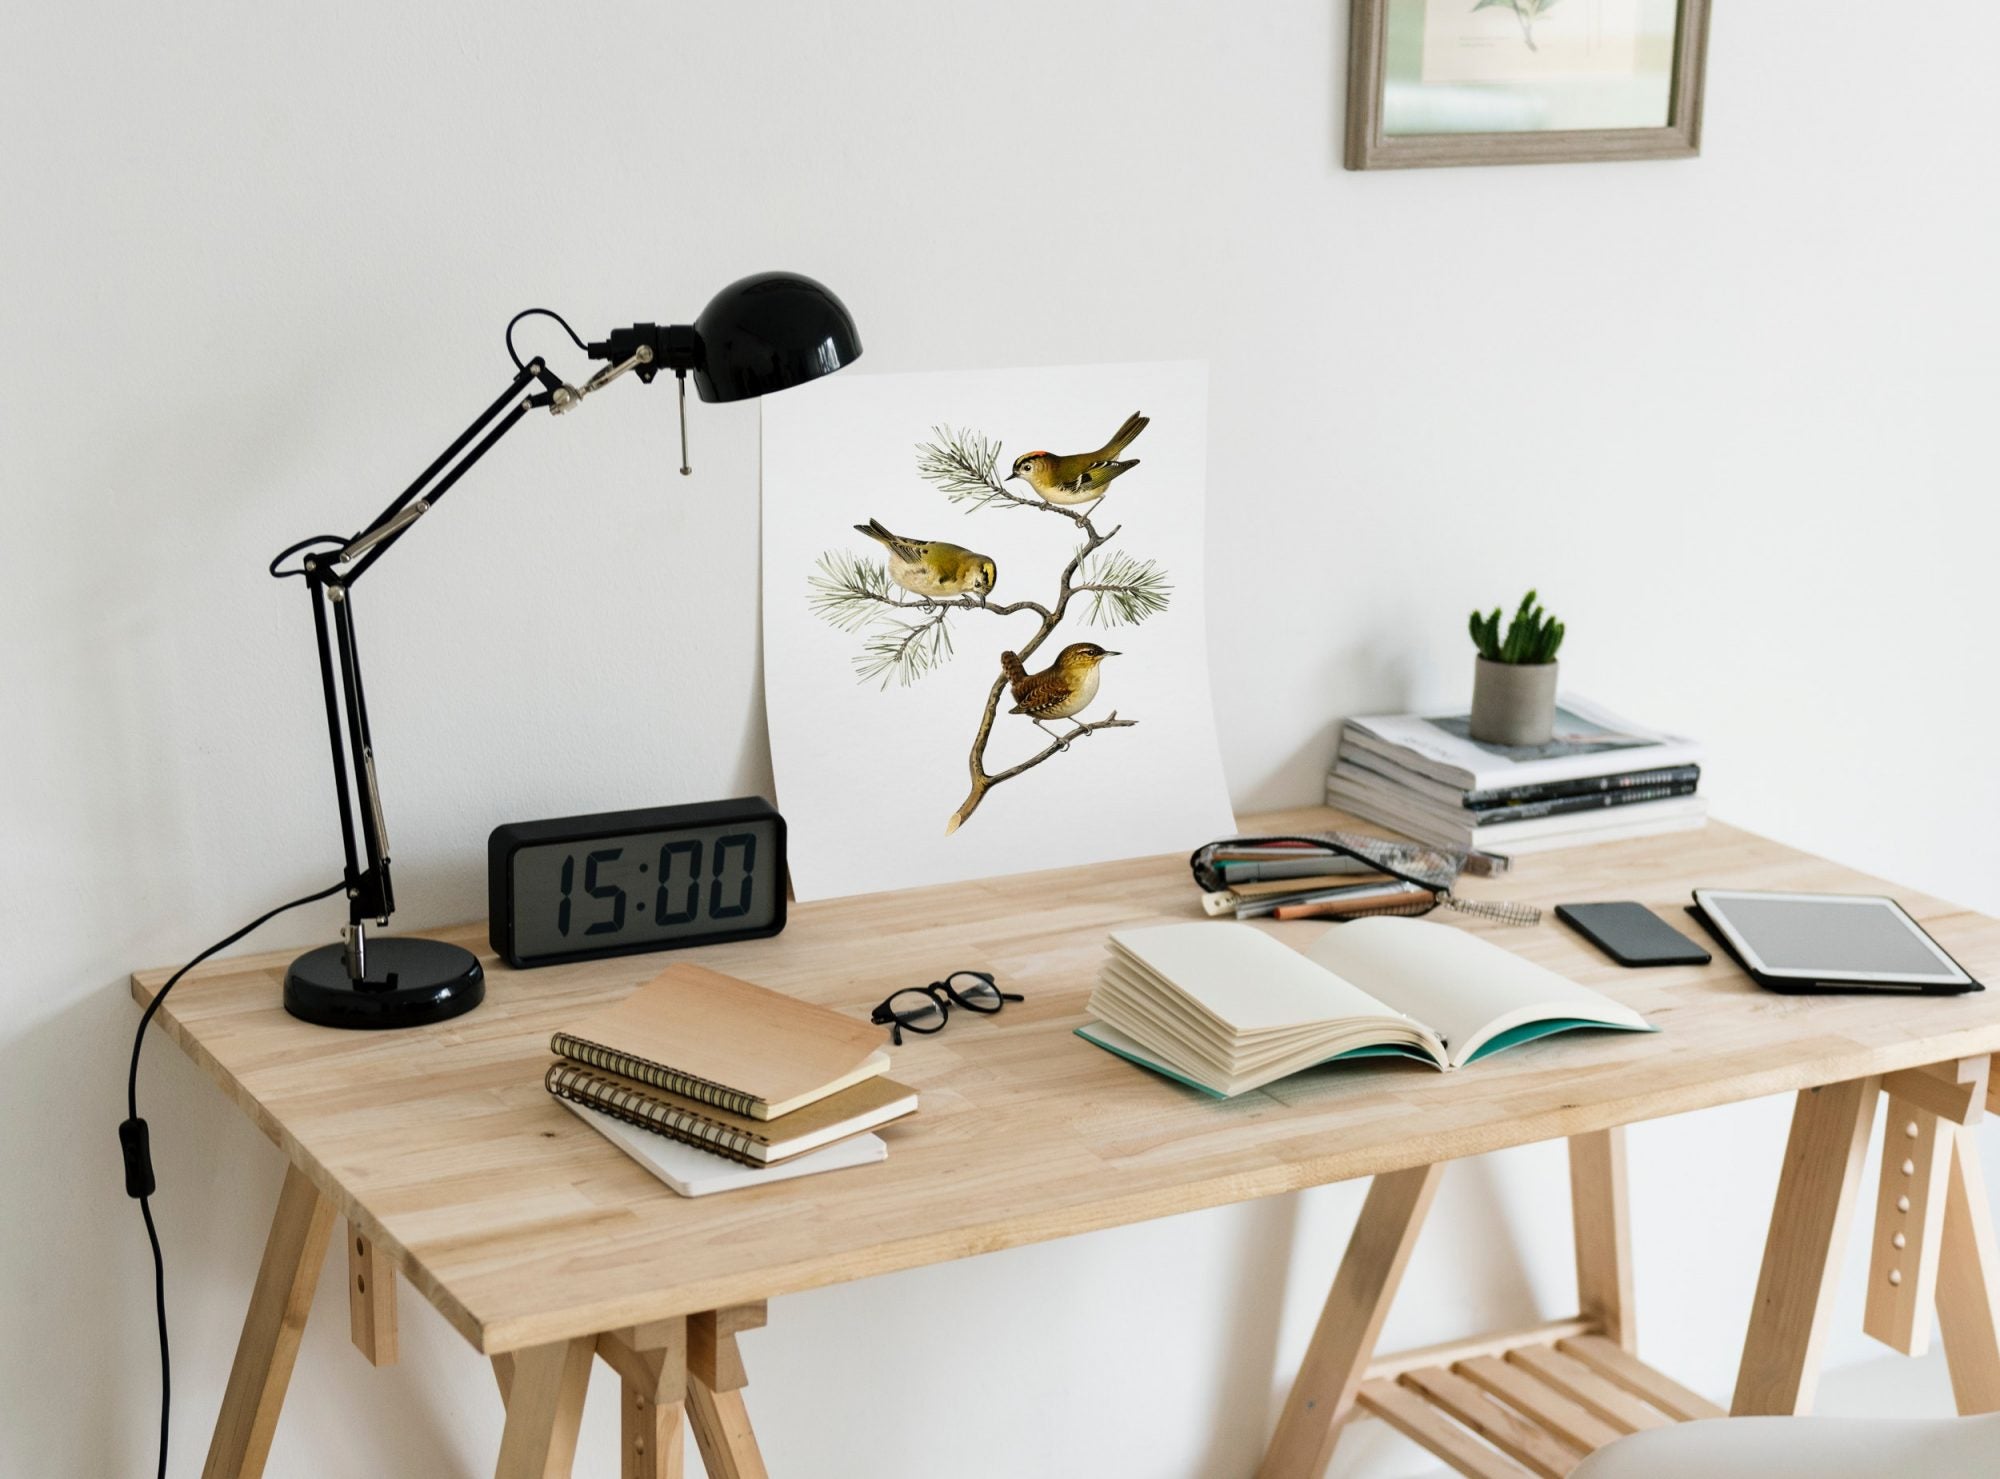 15 Cool Desk Accessories You Don't Want to Live Without